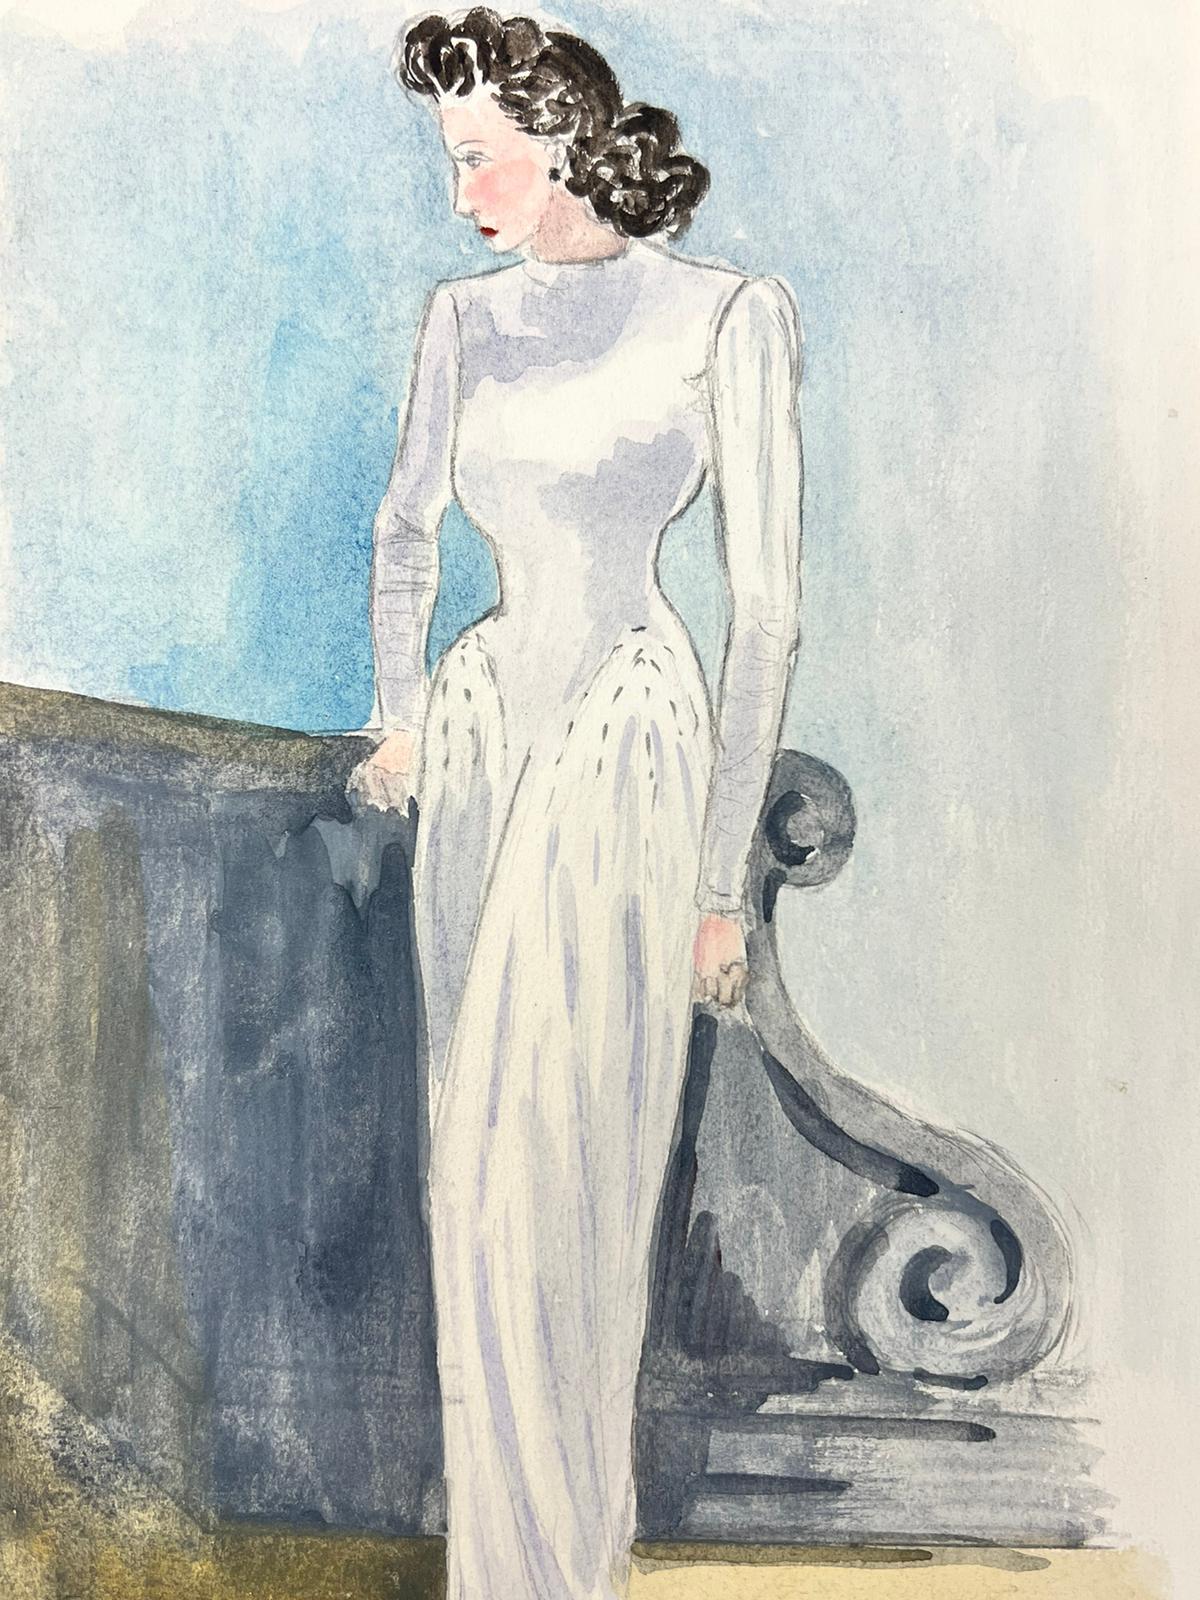 The Artist
by Josine Vignon (French 1922-2022) 
ink/watercolour/pencil drawing on card, unframed
paper: 10 x 6.5 inches
very good condition 
provenance: from the artists estate, France

Josine Vignon (1922-2022) was a French artist living on the Rue